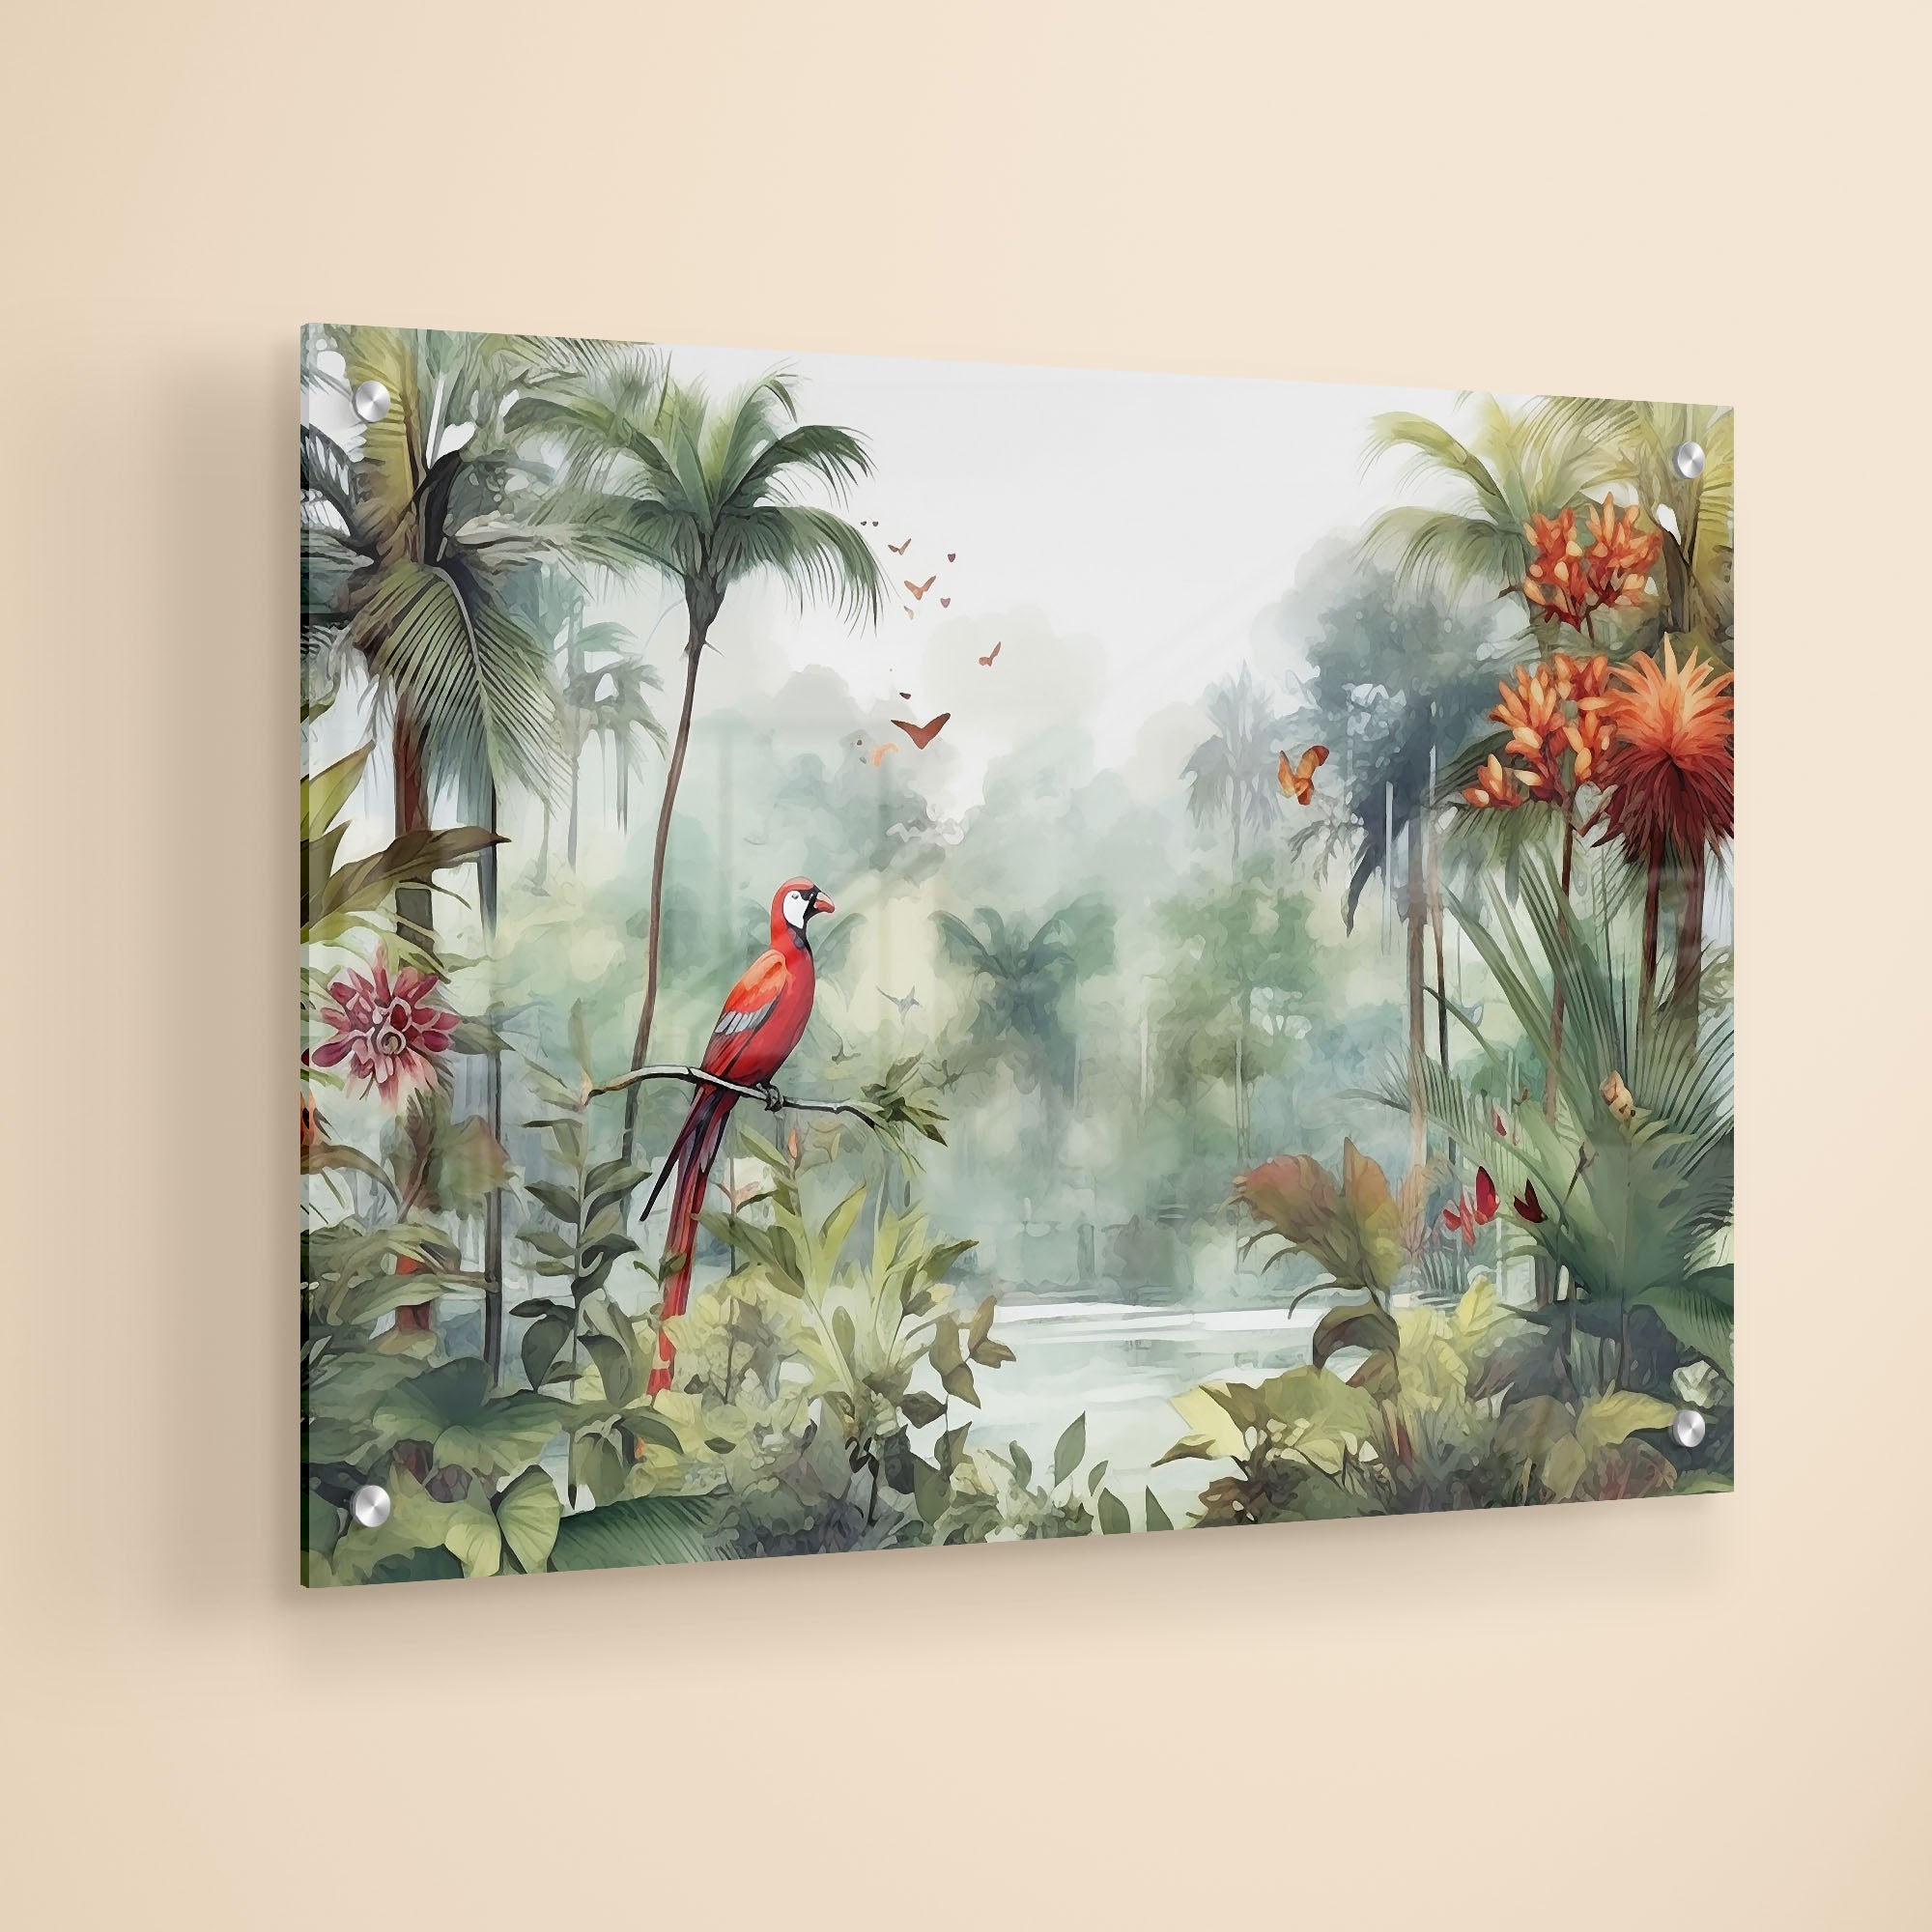 Red Birds and Jungle View Abstract Art Acrylic Wall Painting